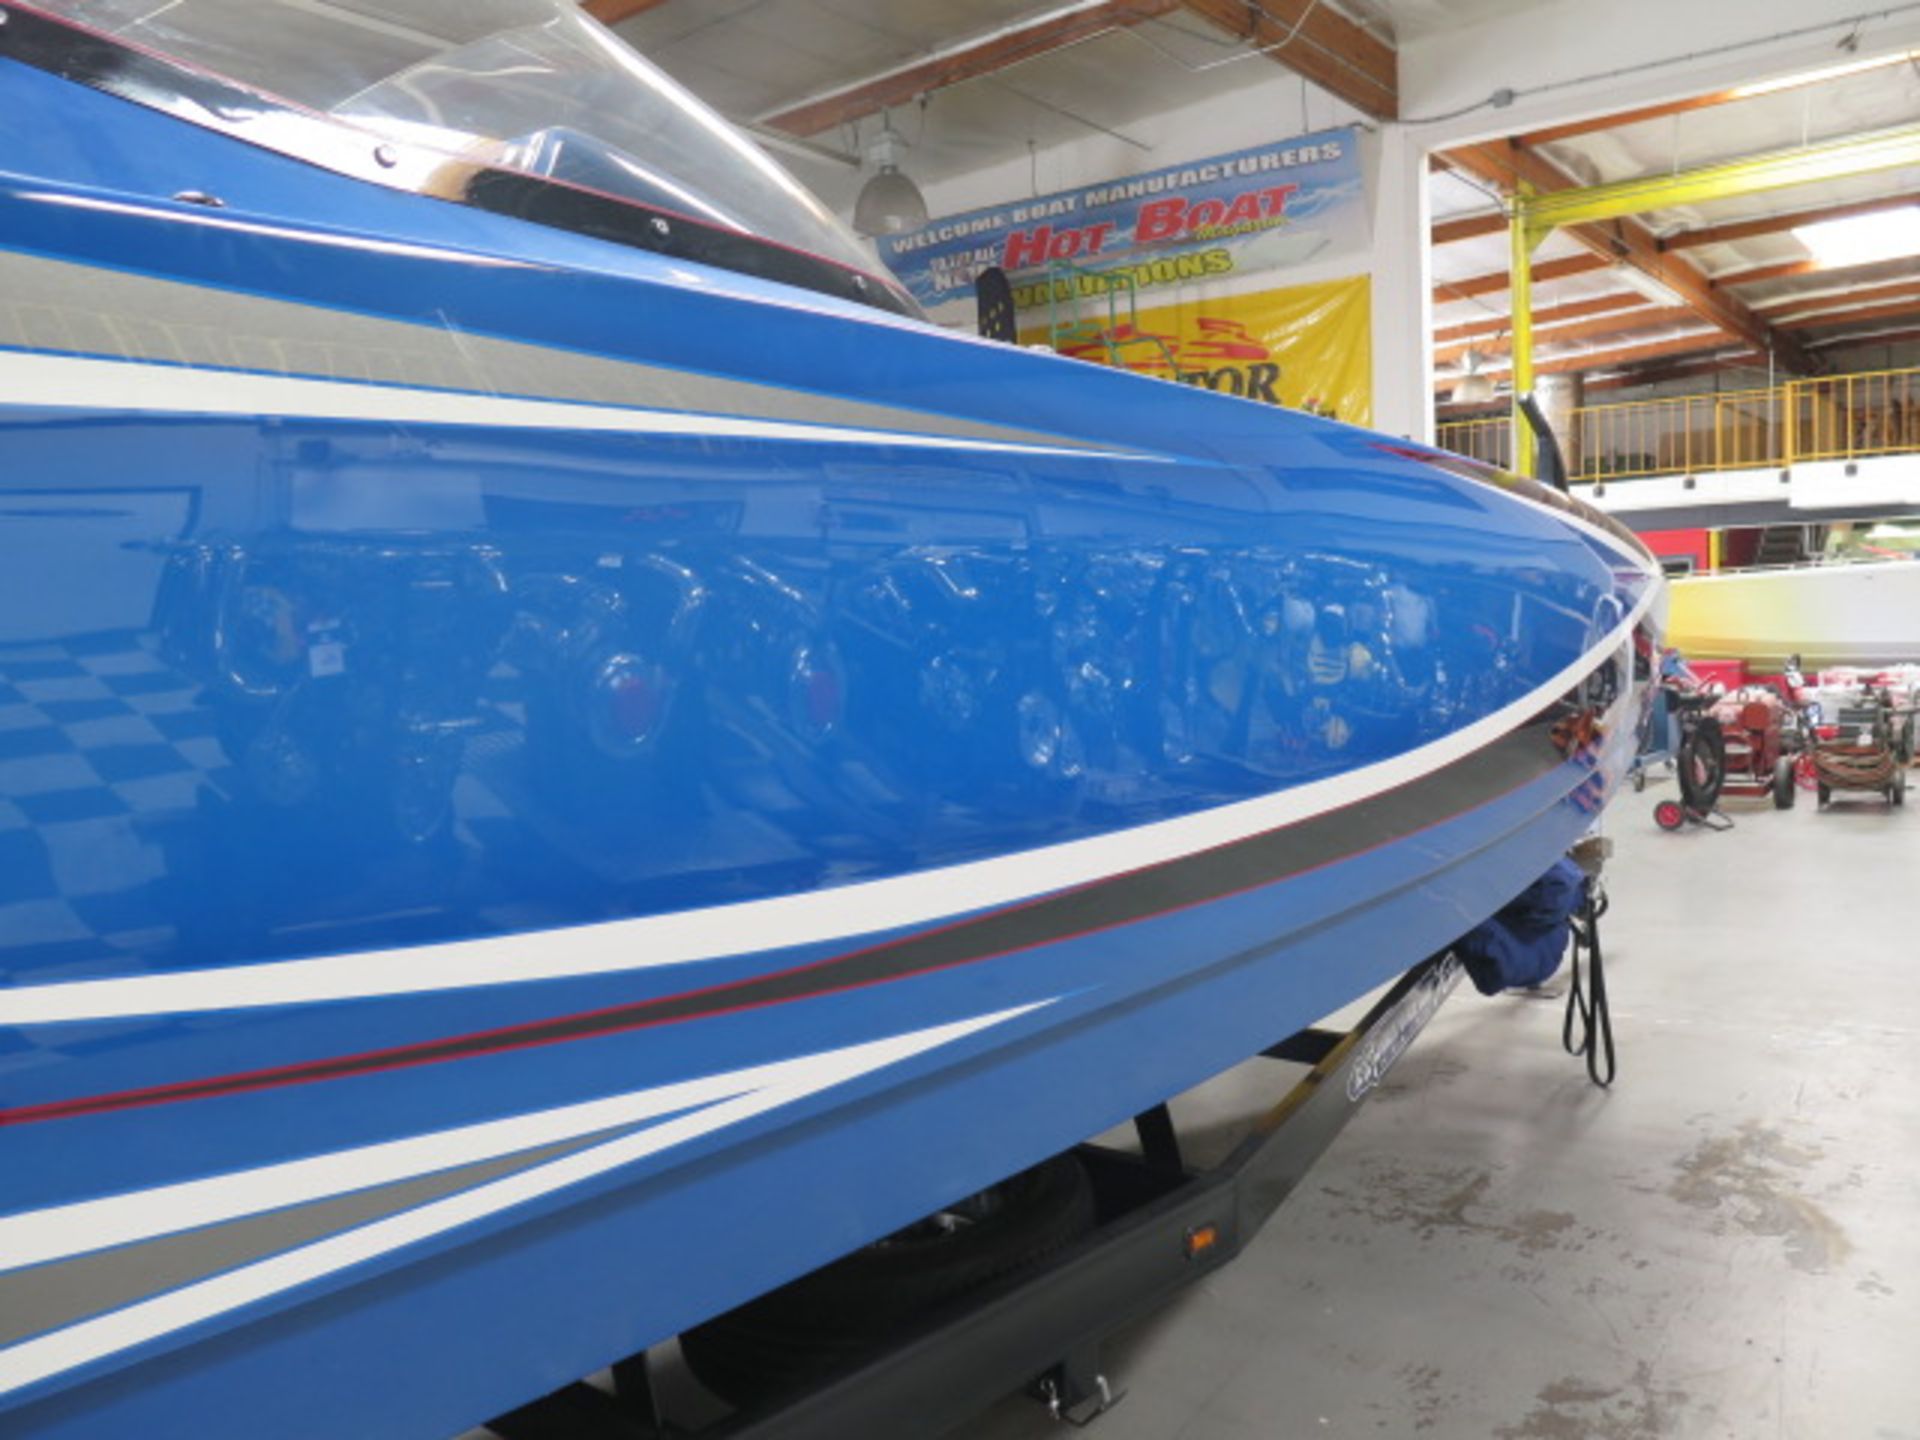 2020 28 Ultra Deck Boat w/ Boostpower 550 EFI (23 Hrs), Inco SCX Drive, Deluxe Options, SOLD AS IS - Image 14 of 58